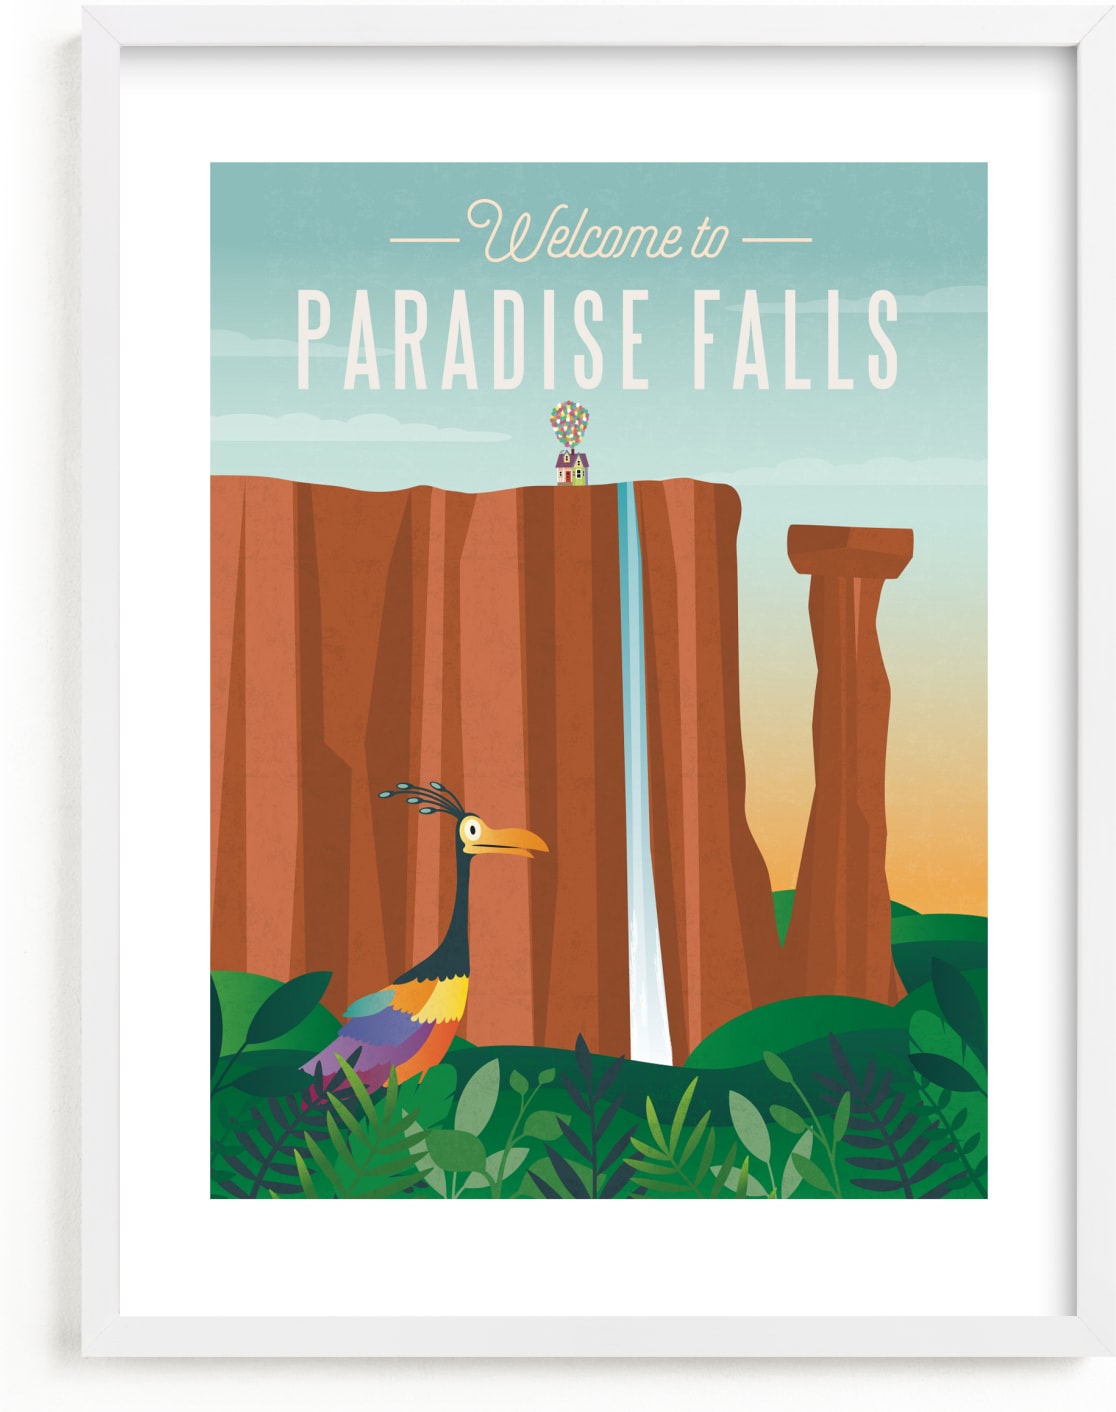 This is a blue disney art by Erica Krystek called Welcome to Paradise Falls from Disney and Pixar's Up.